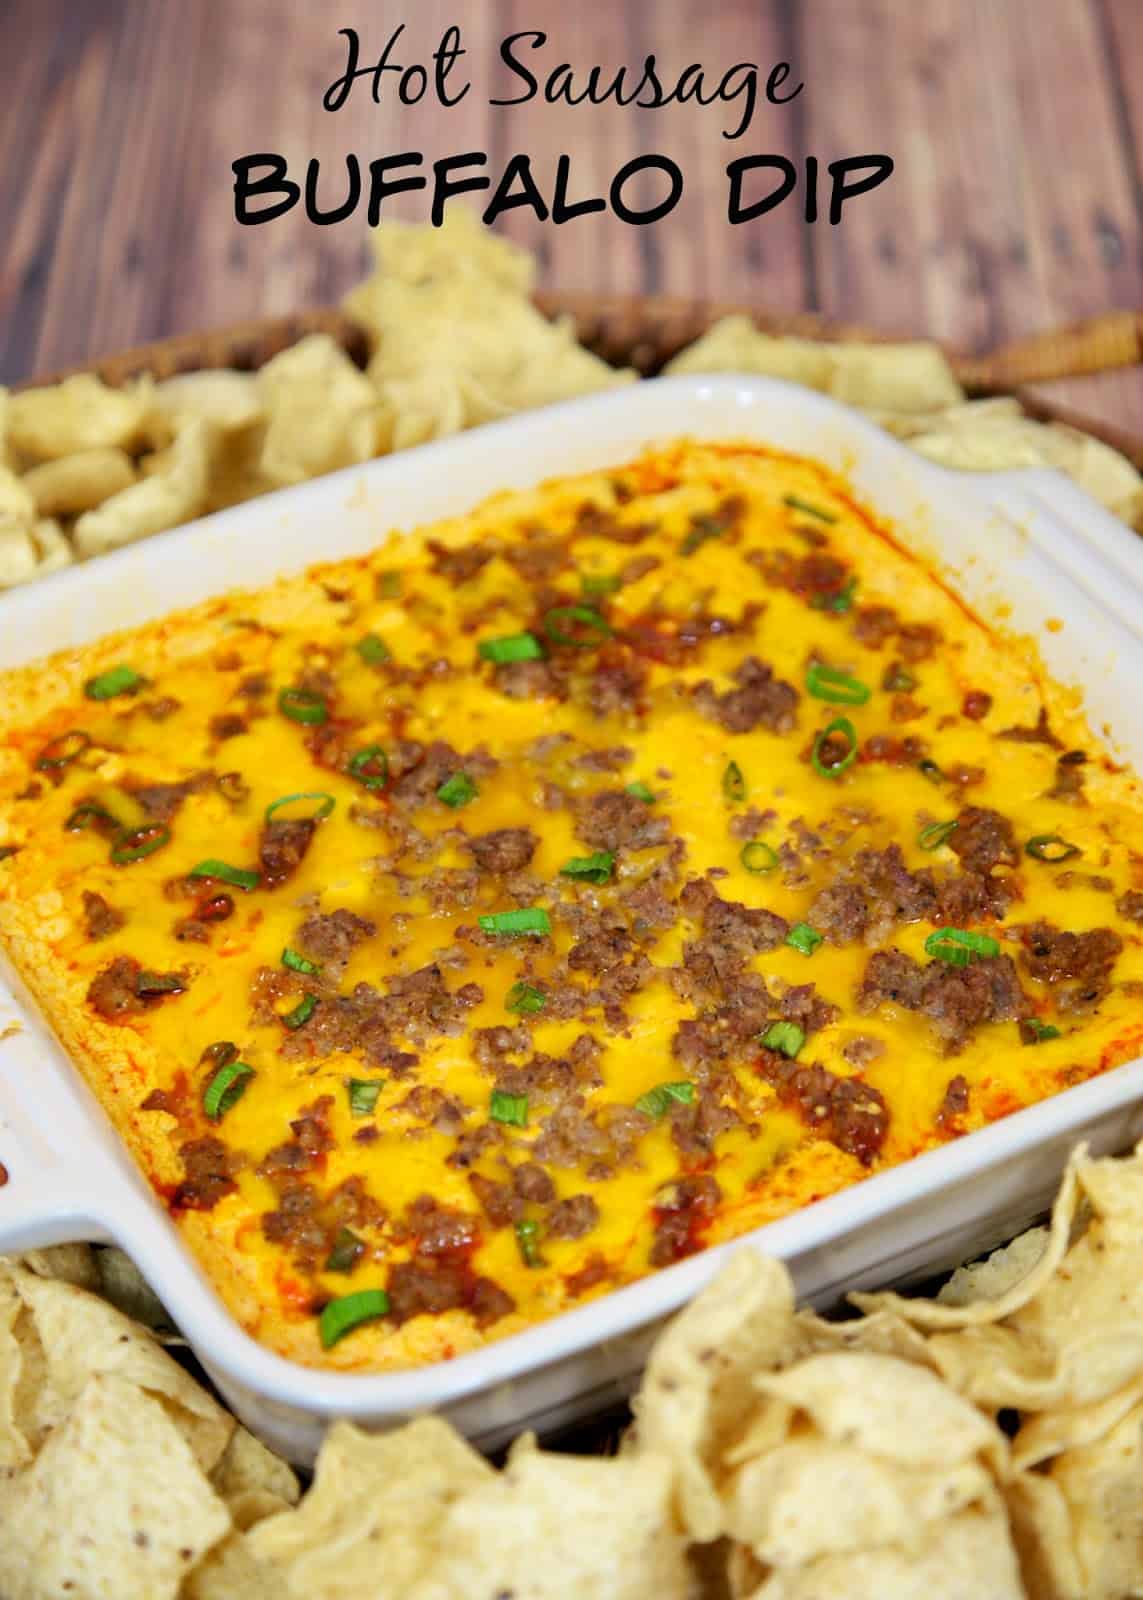 Hot Sausage Buffalo Dip - cream cheese, sausage, cheddar and buffalo sauce - I could make a meal out of this dip! Great for parties and tailgating! Everyone RAVES about this easy dip recipe! Always the first thing to go!